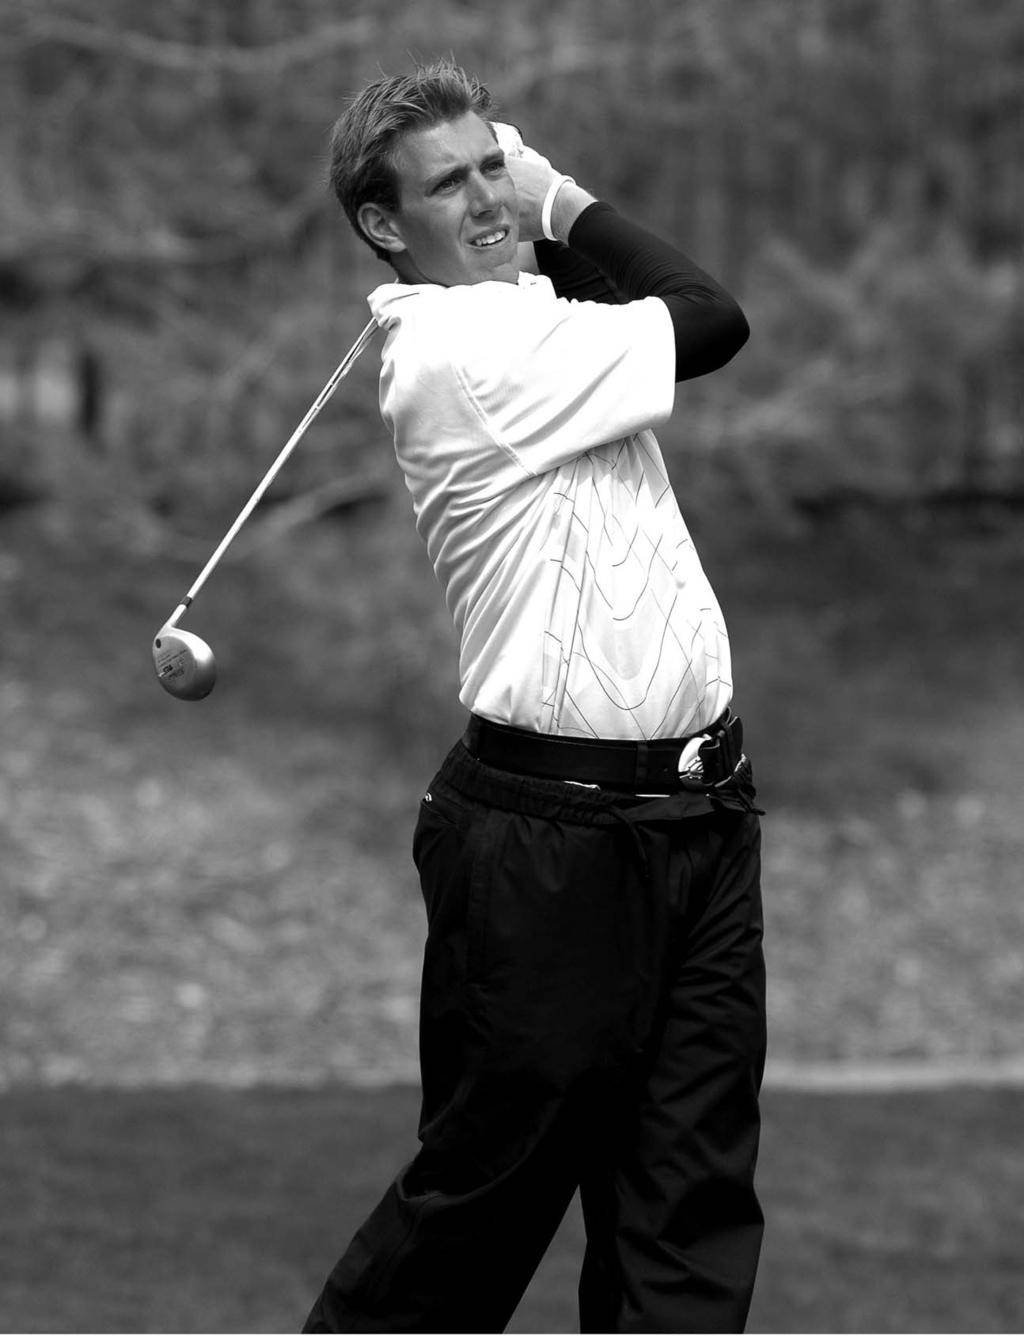 GATTO S CAREER FINISHES 2004-05 T20th Southern Highlands Collegiate Championship 72-74-74 220 2005-06 T22nd PING/Golfweek